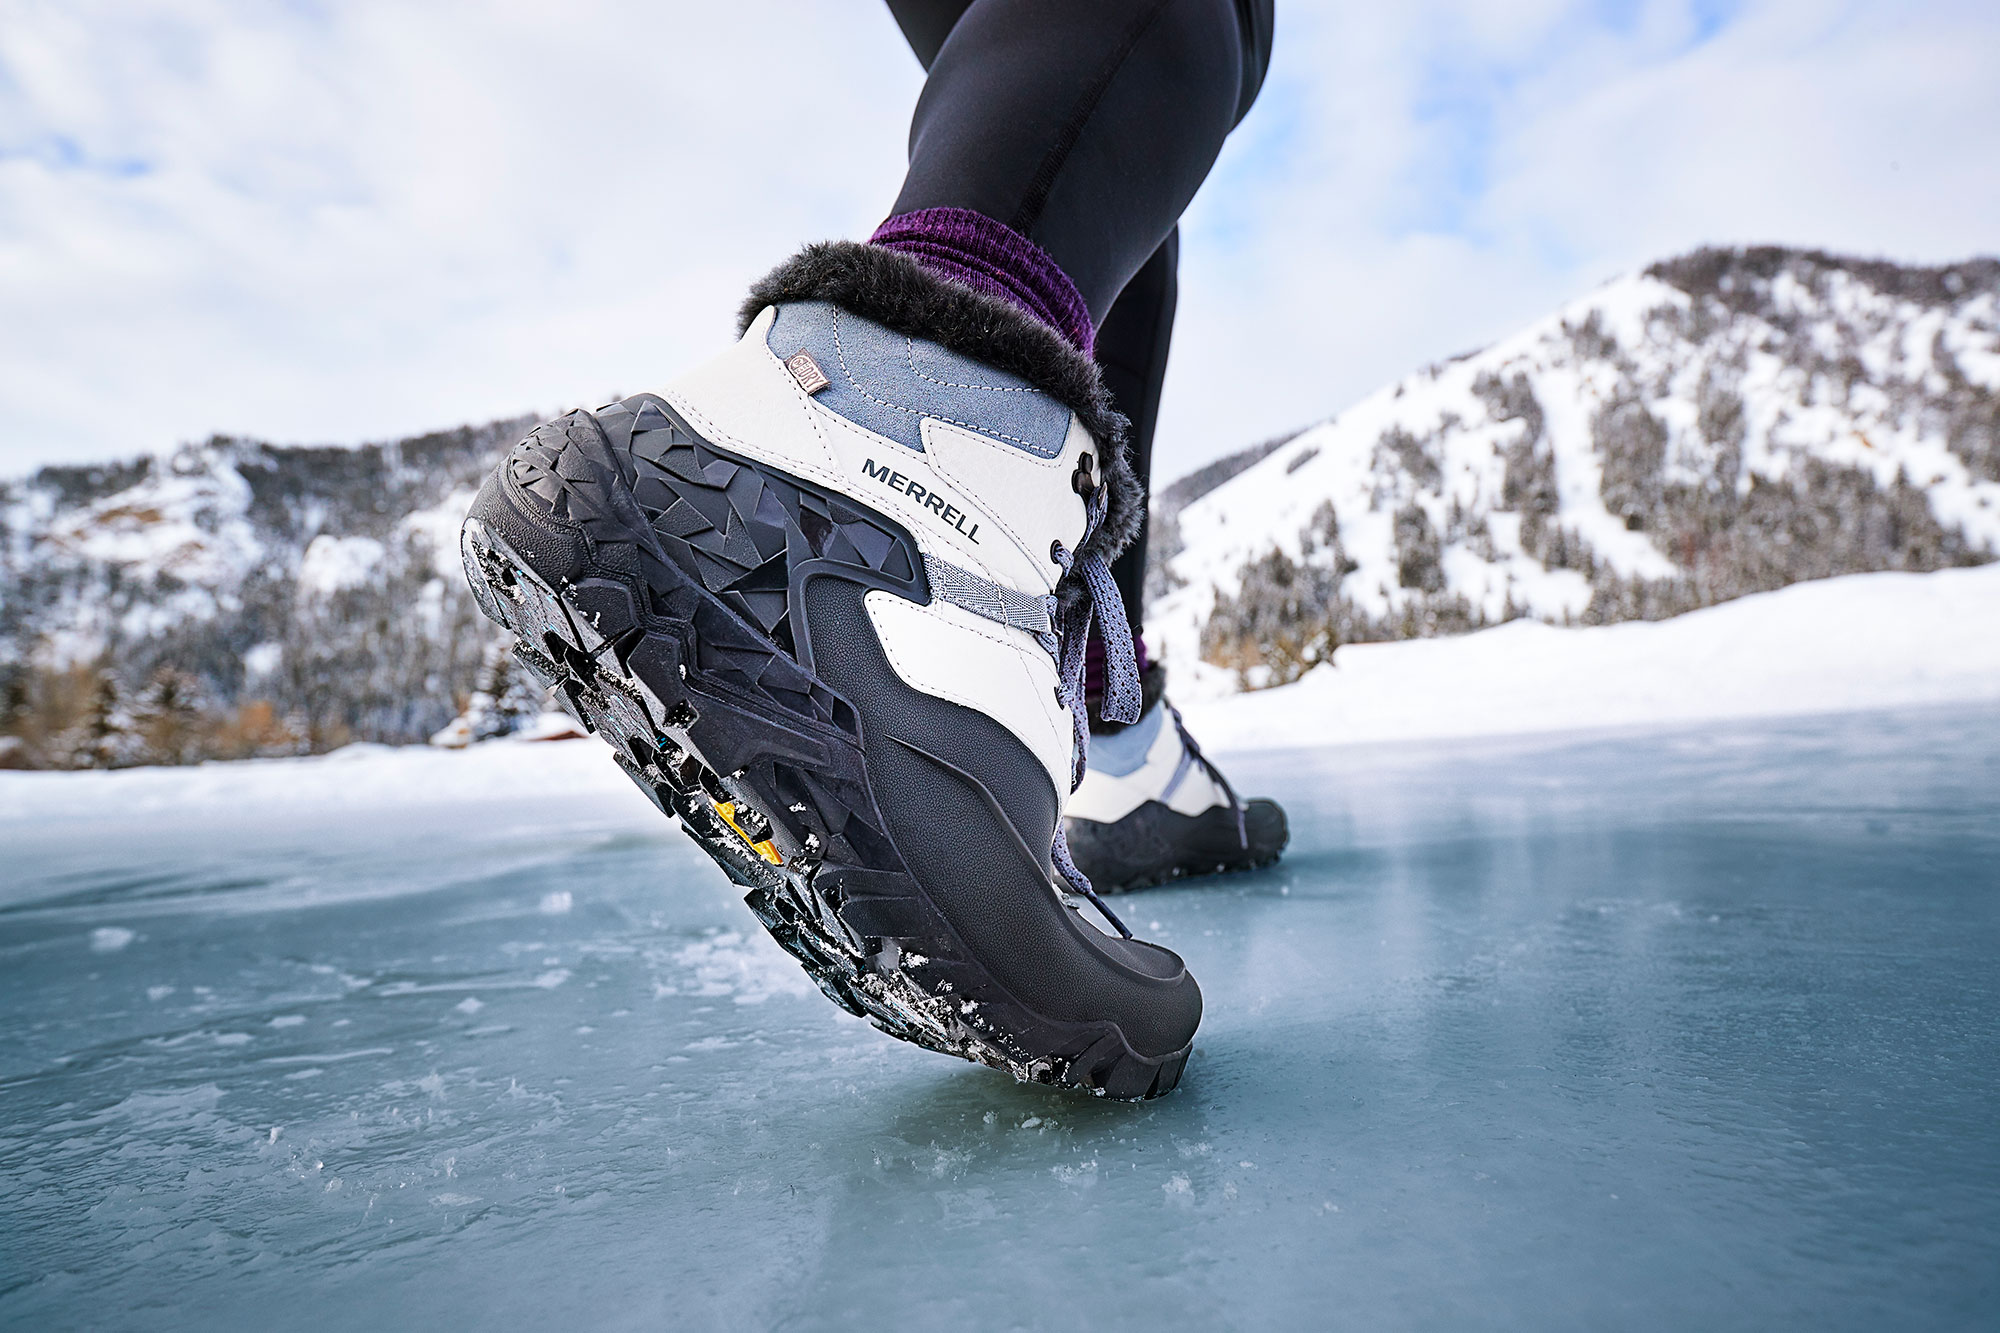 Merrell Sun Valley Campaign shot by Andrew Maguire